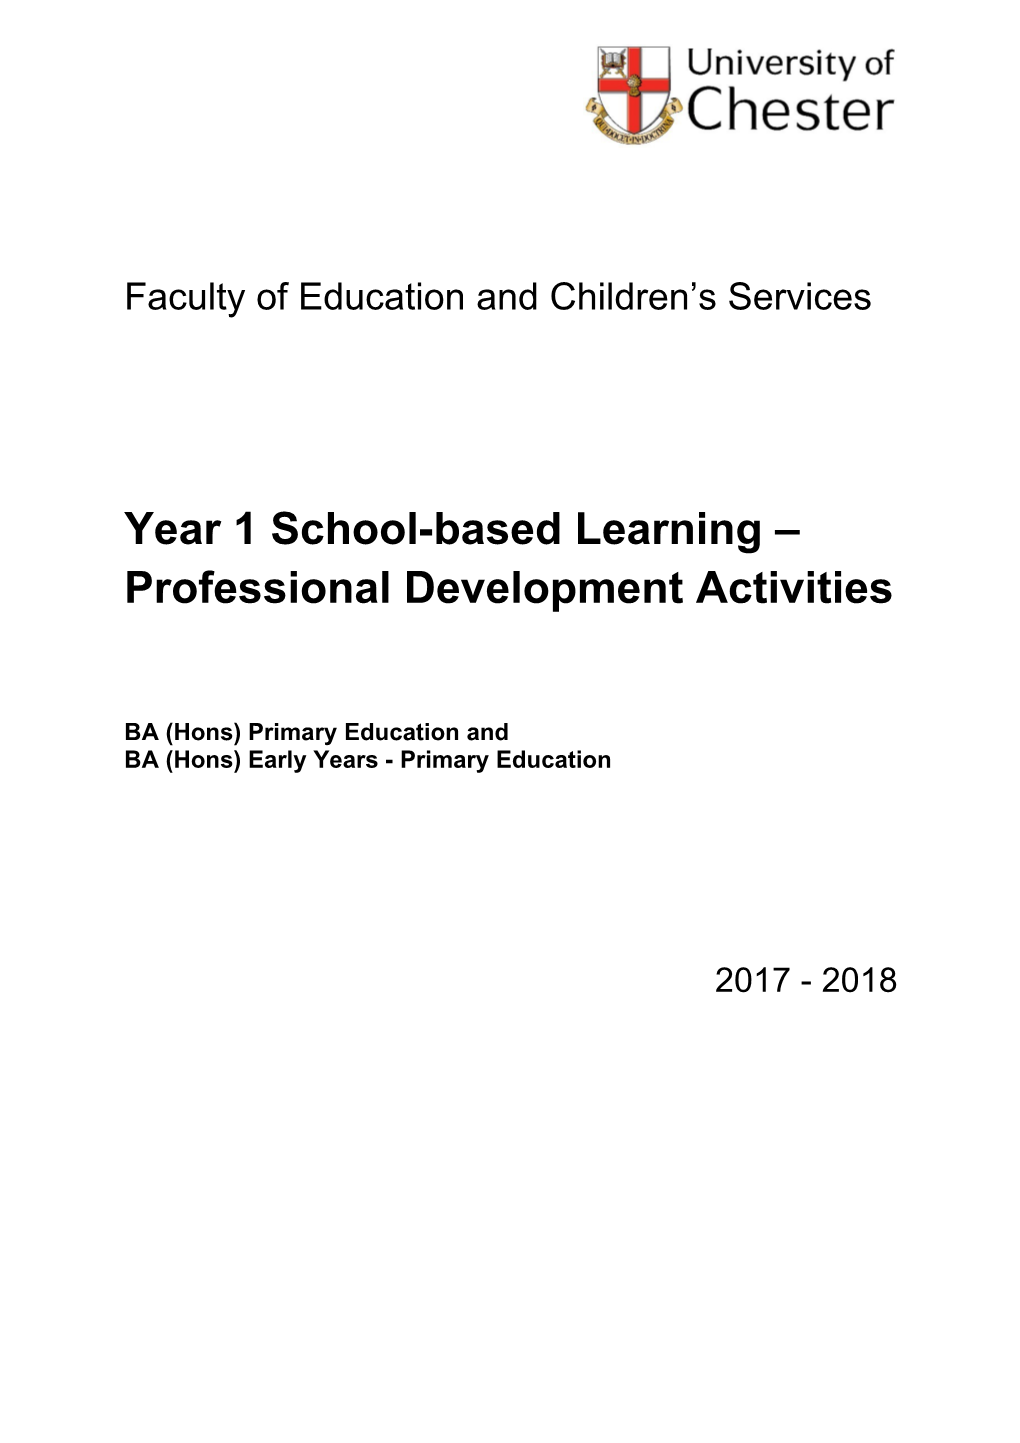 University of Chester Faculty of Education and Children S Services